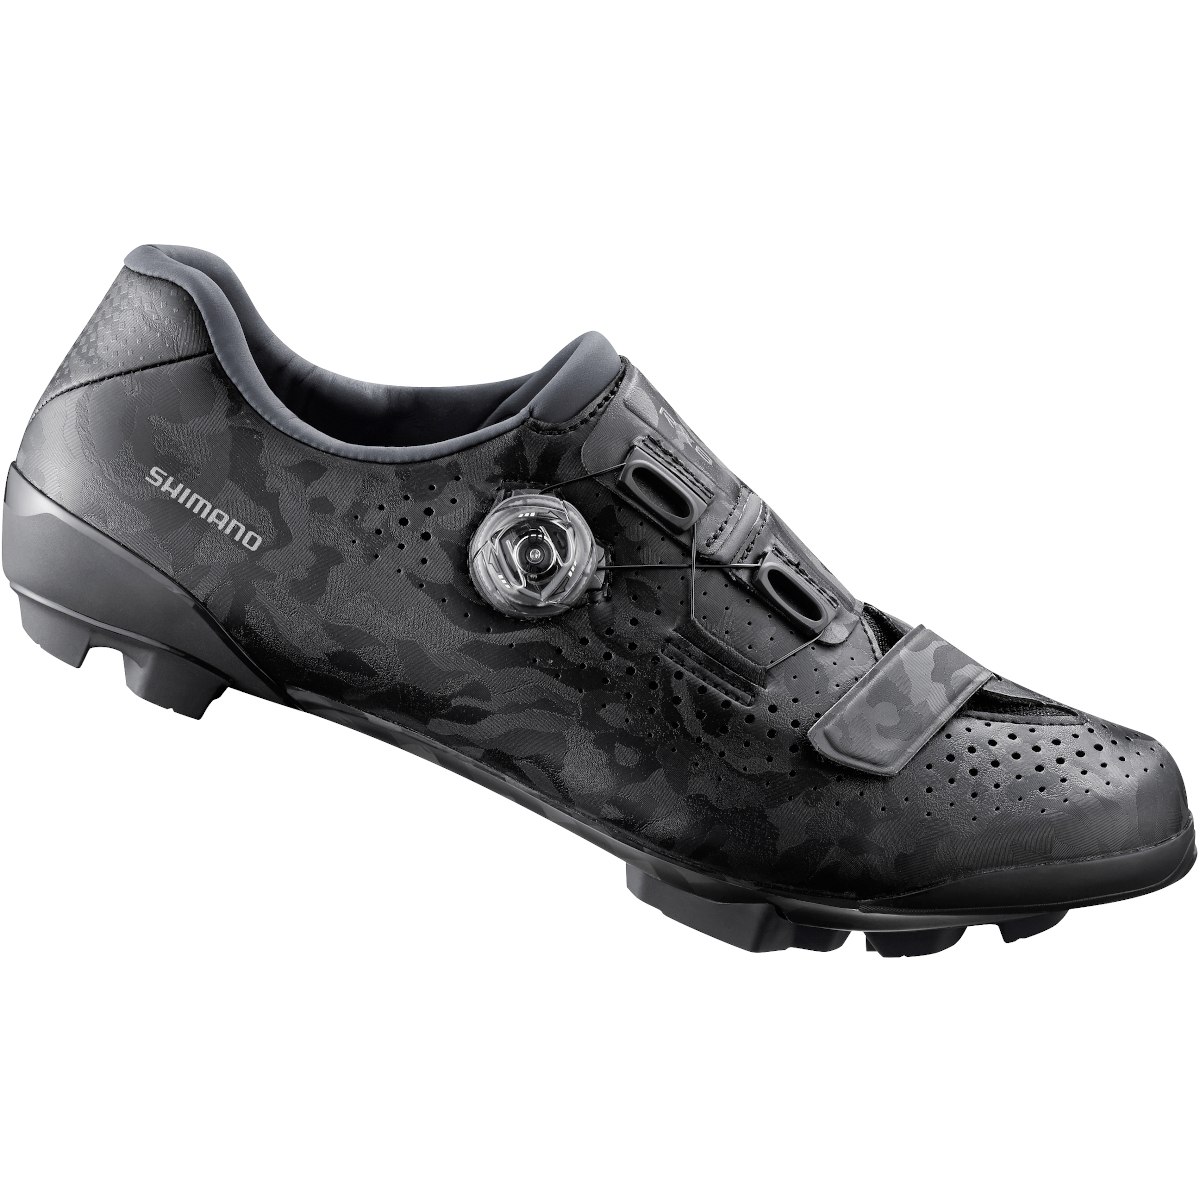 Picture of Shimano SH-RX800 Gravel Shoes - black